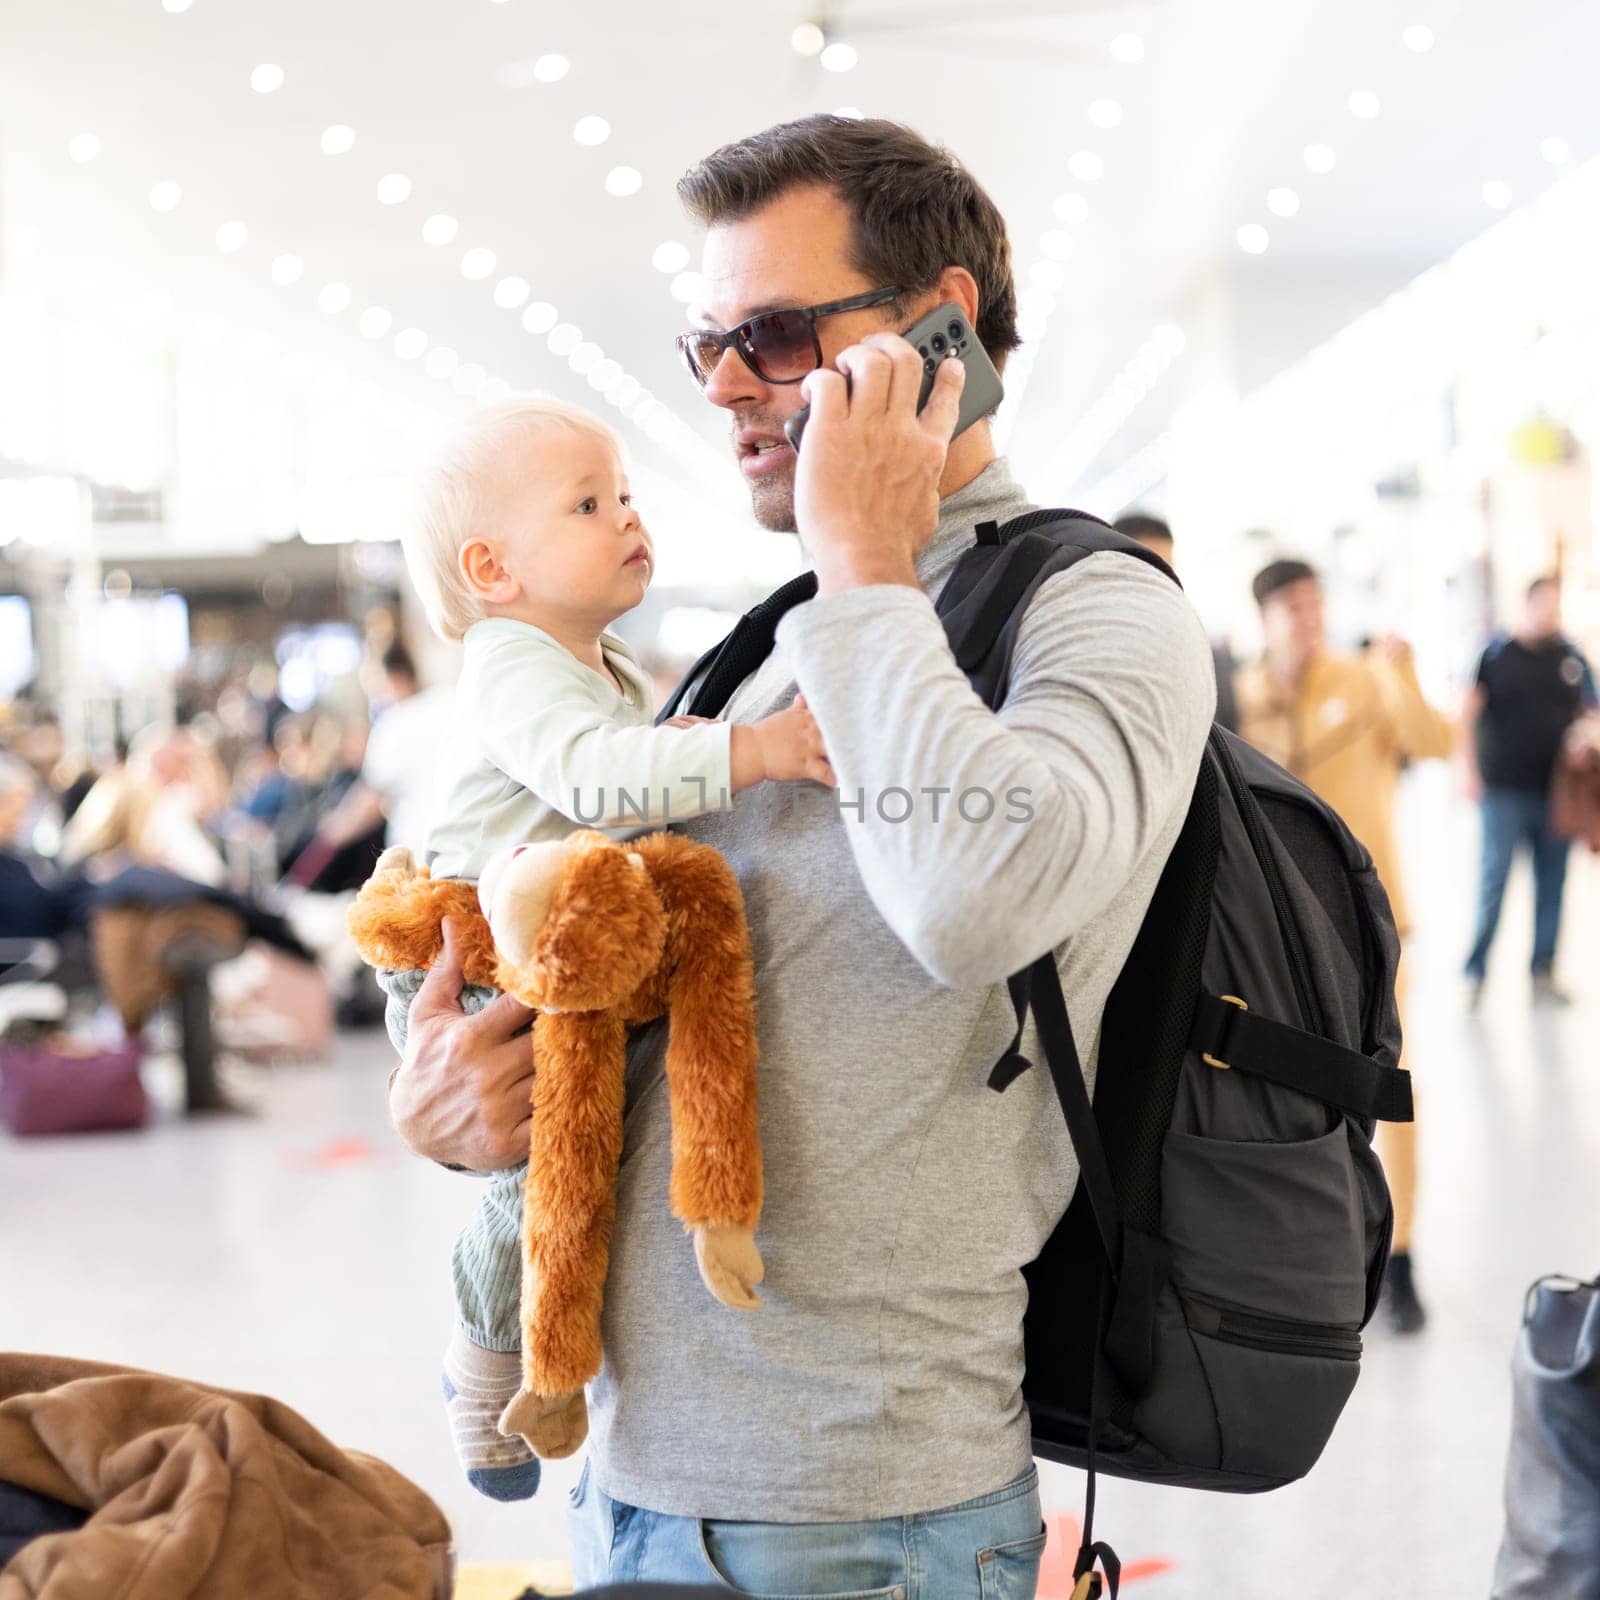 Father traveling with child, holding his infant baby boy at airport terminal waiting to board a plane. Travel with kids concept. by kasto